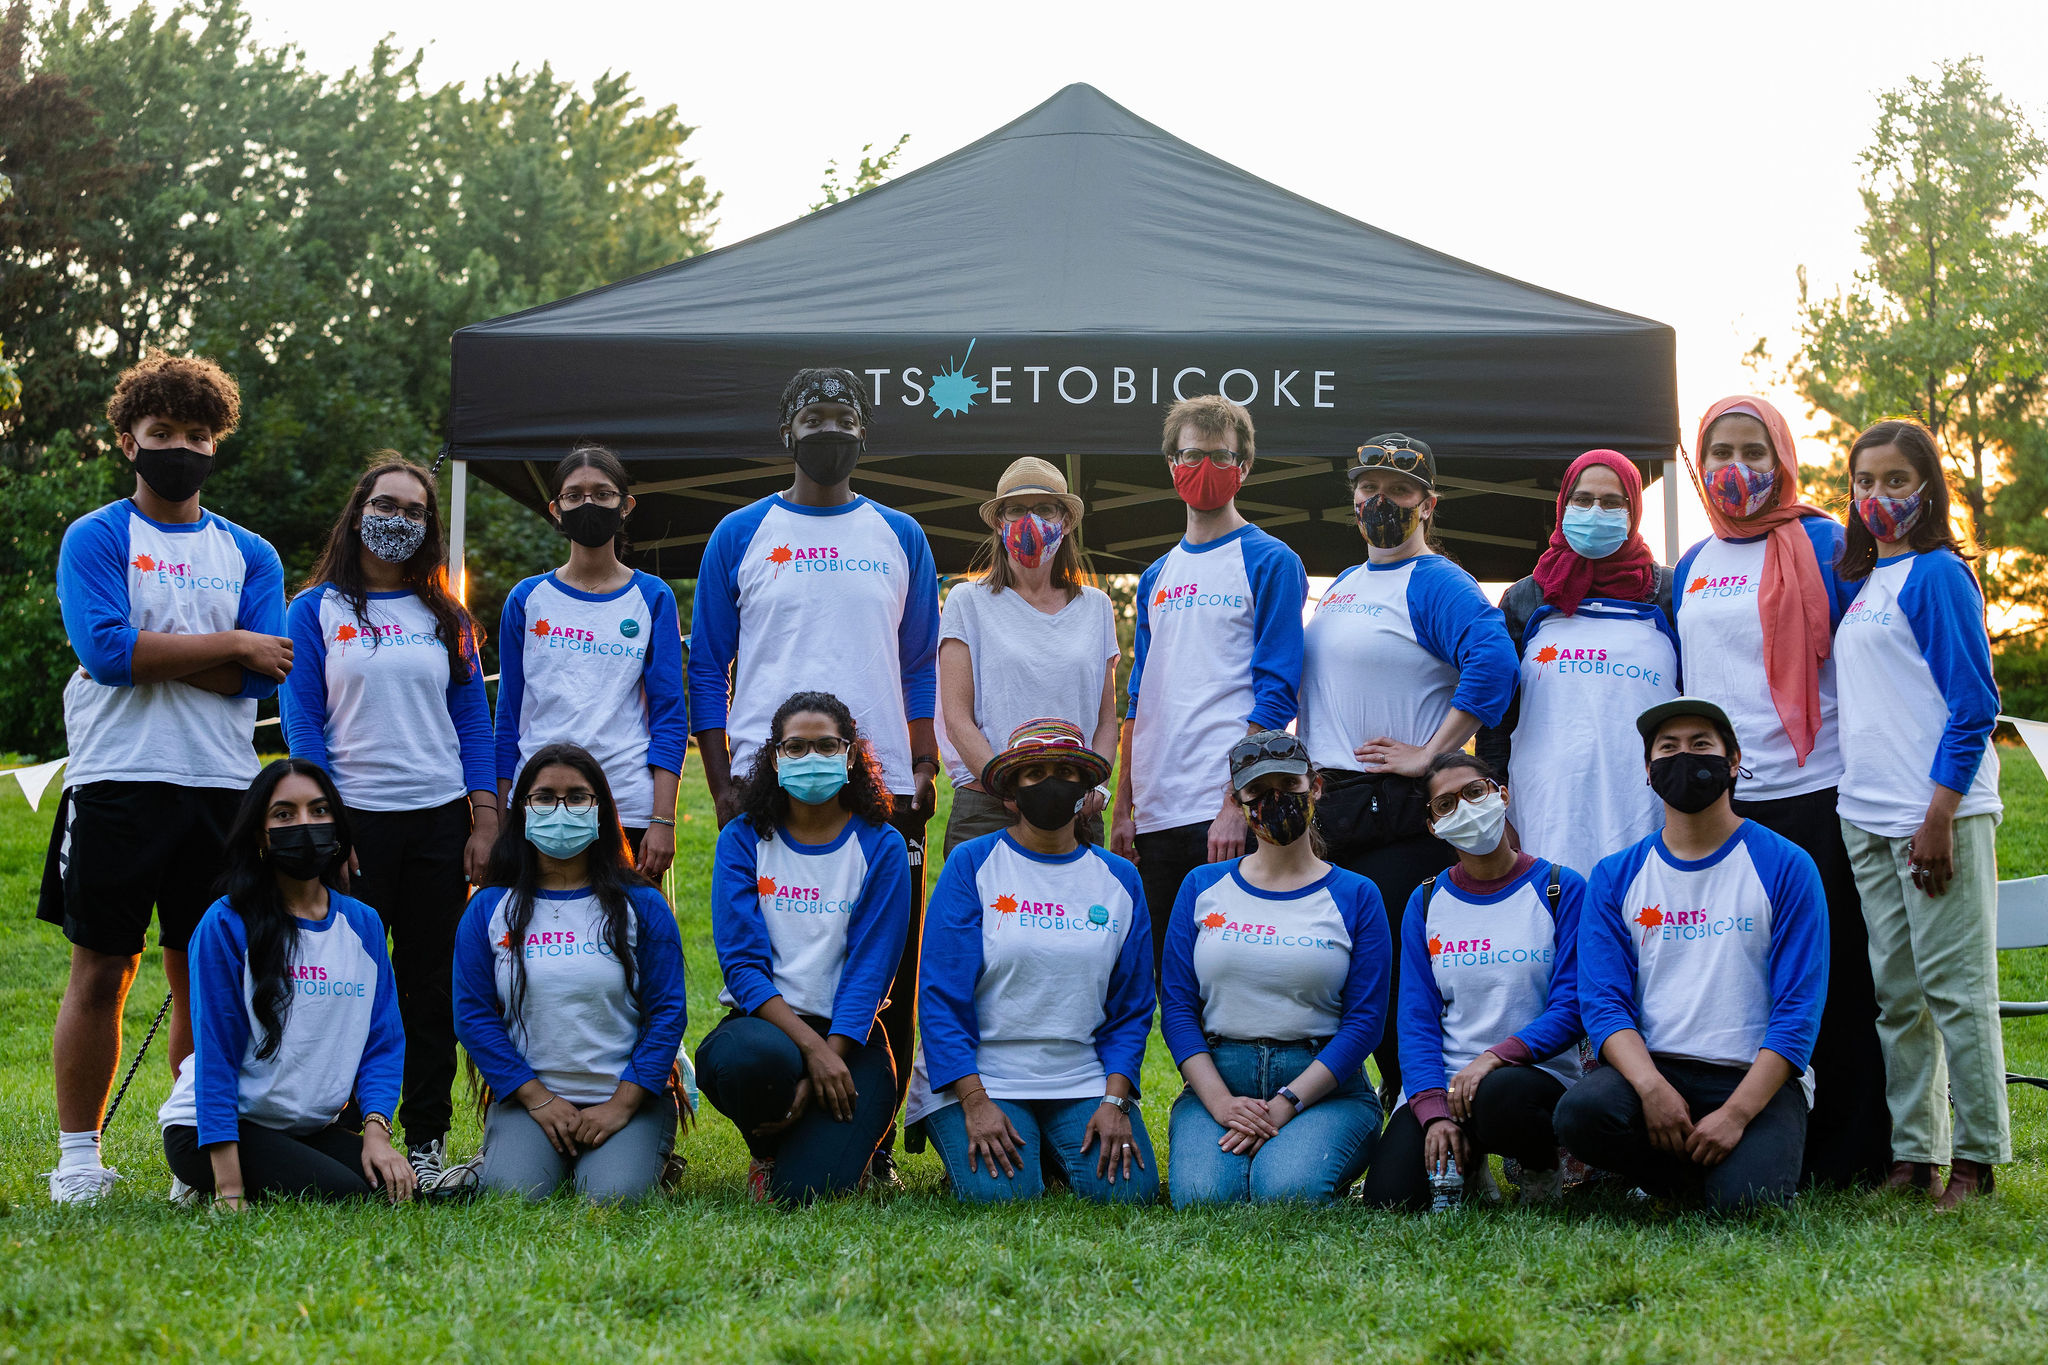 A group of people in white and blue shirts crouch and stand together in front of an Arts Etobicoke tent. They look directly at the camera and are wearing face masks.